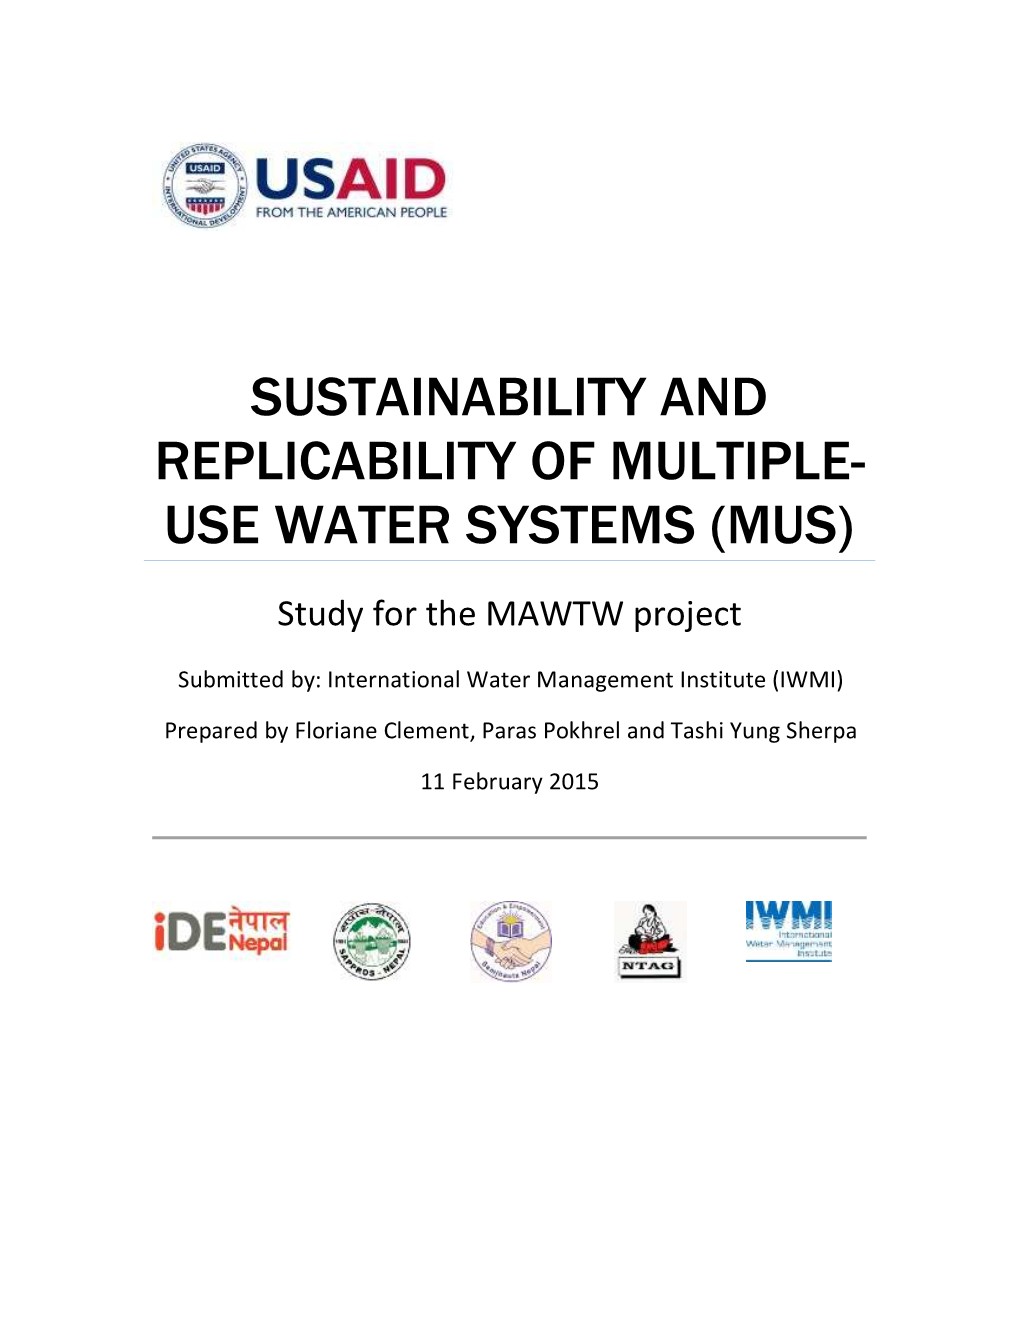 Use Water Systems (Mus)